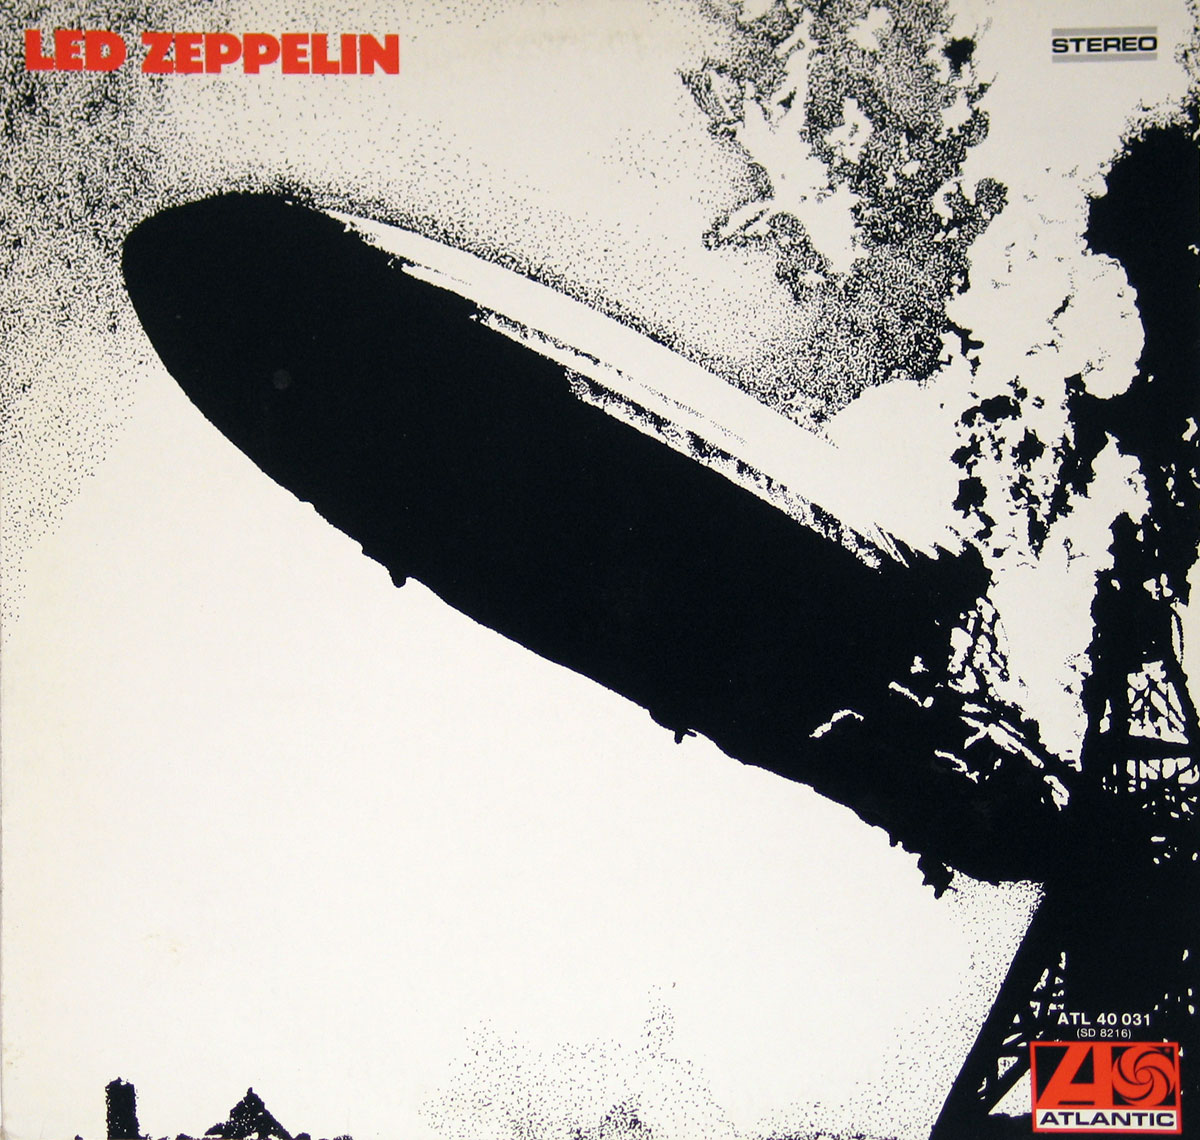 High Resolution Photo of Led Zeppelin - Self-Titled LP 